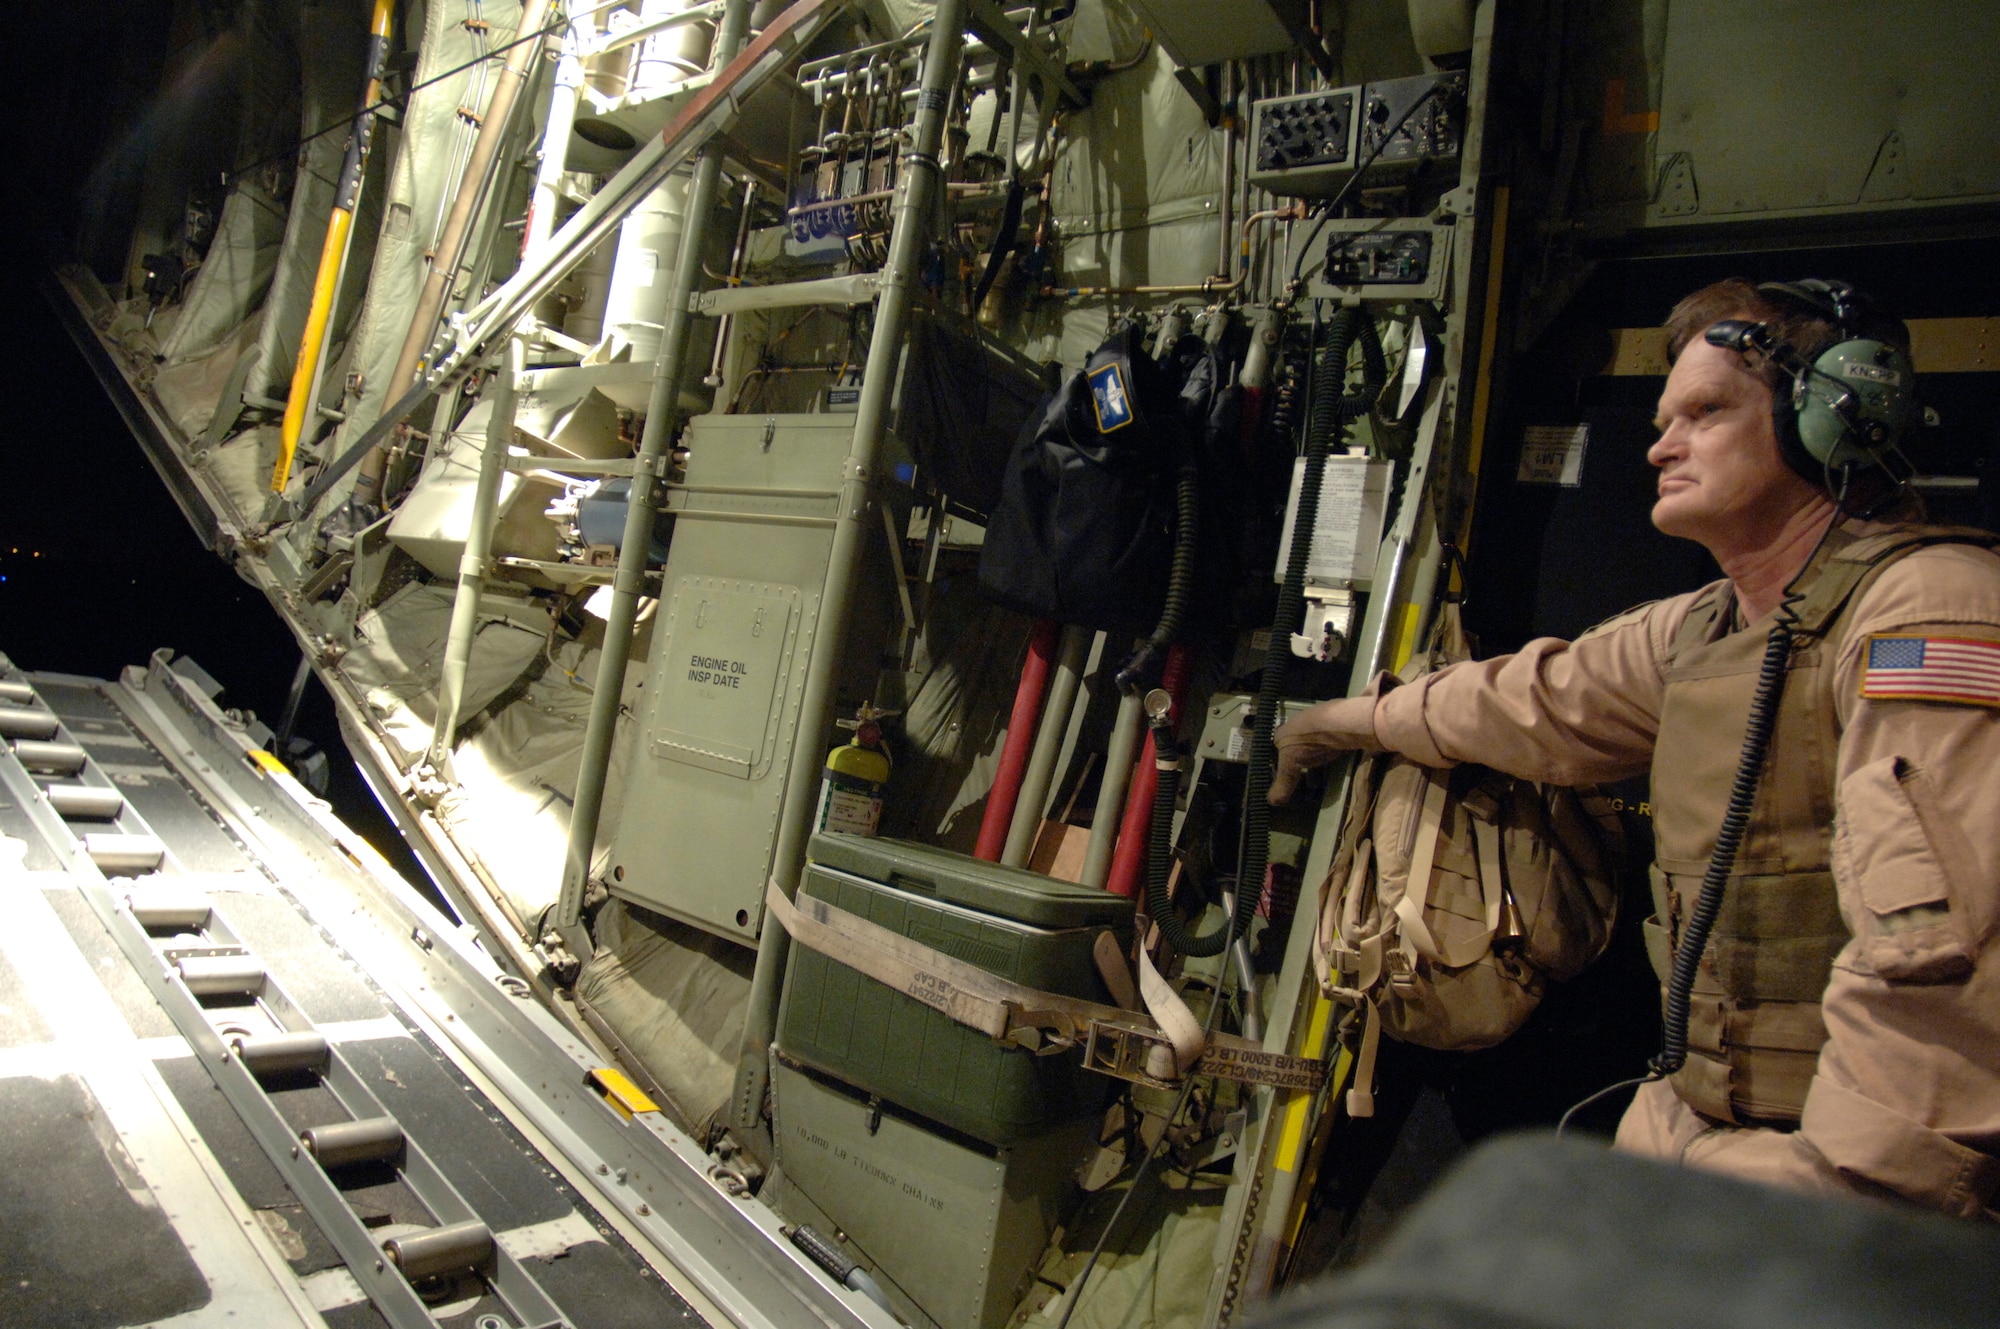 Master Sgt. Keith Knepp lowers the cargo-loading ramp of a C-130 Hercules. Sergeant Knepp recently exceeded his 10,000th hour of aircrew experience. The reservist is deployed from the 327th Airlift Squadron at Willow Grove Air Reserve Station, Pa., to the 746th Expeditionary Airlift Squadron in support of Operation Iraqi Freedom. (U.S. Air Force photo/Master Sgt. Lance Cheung)